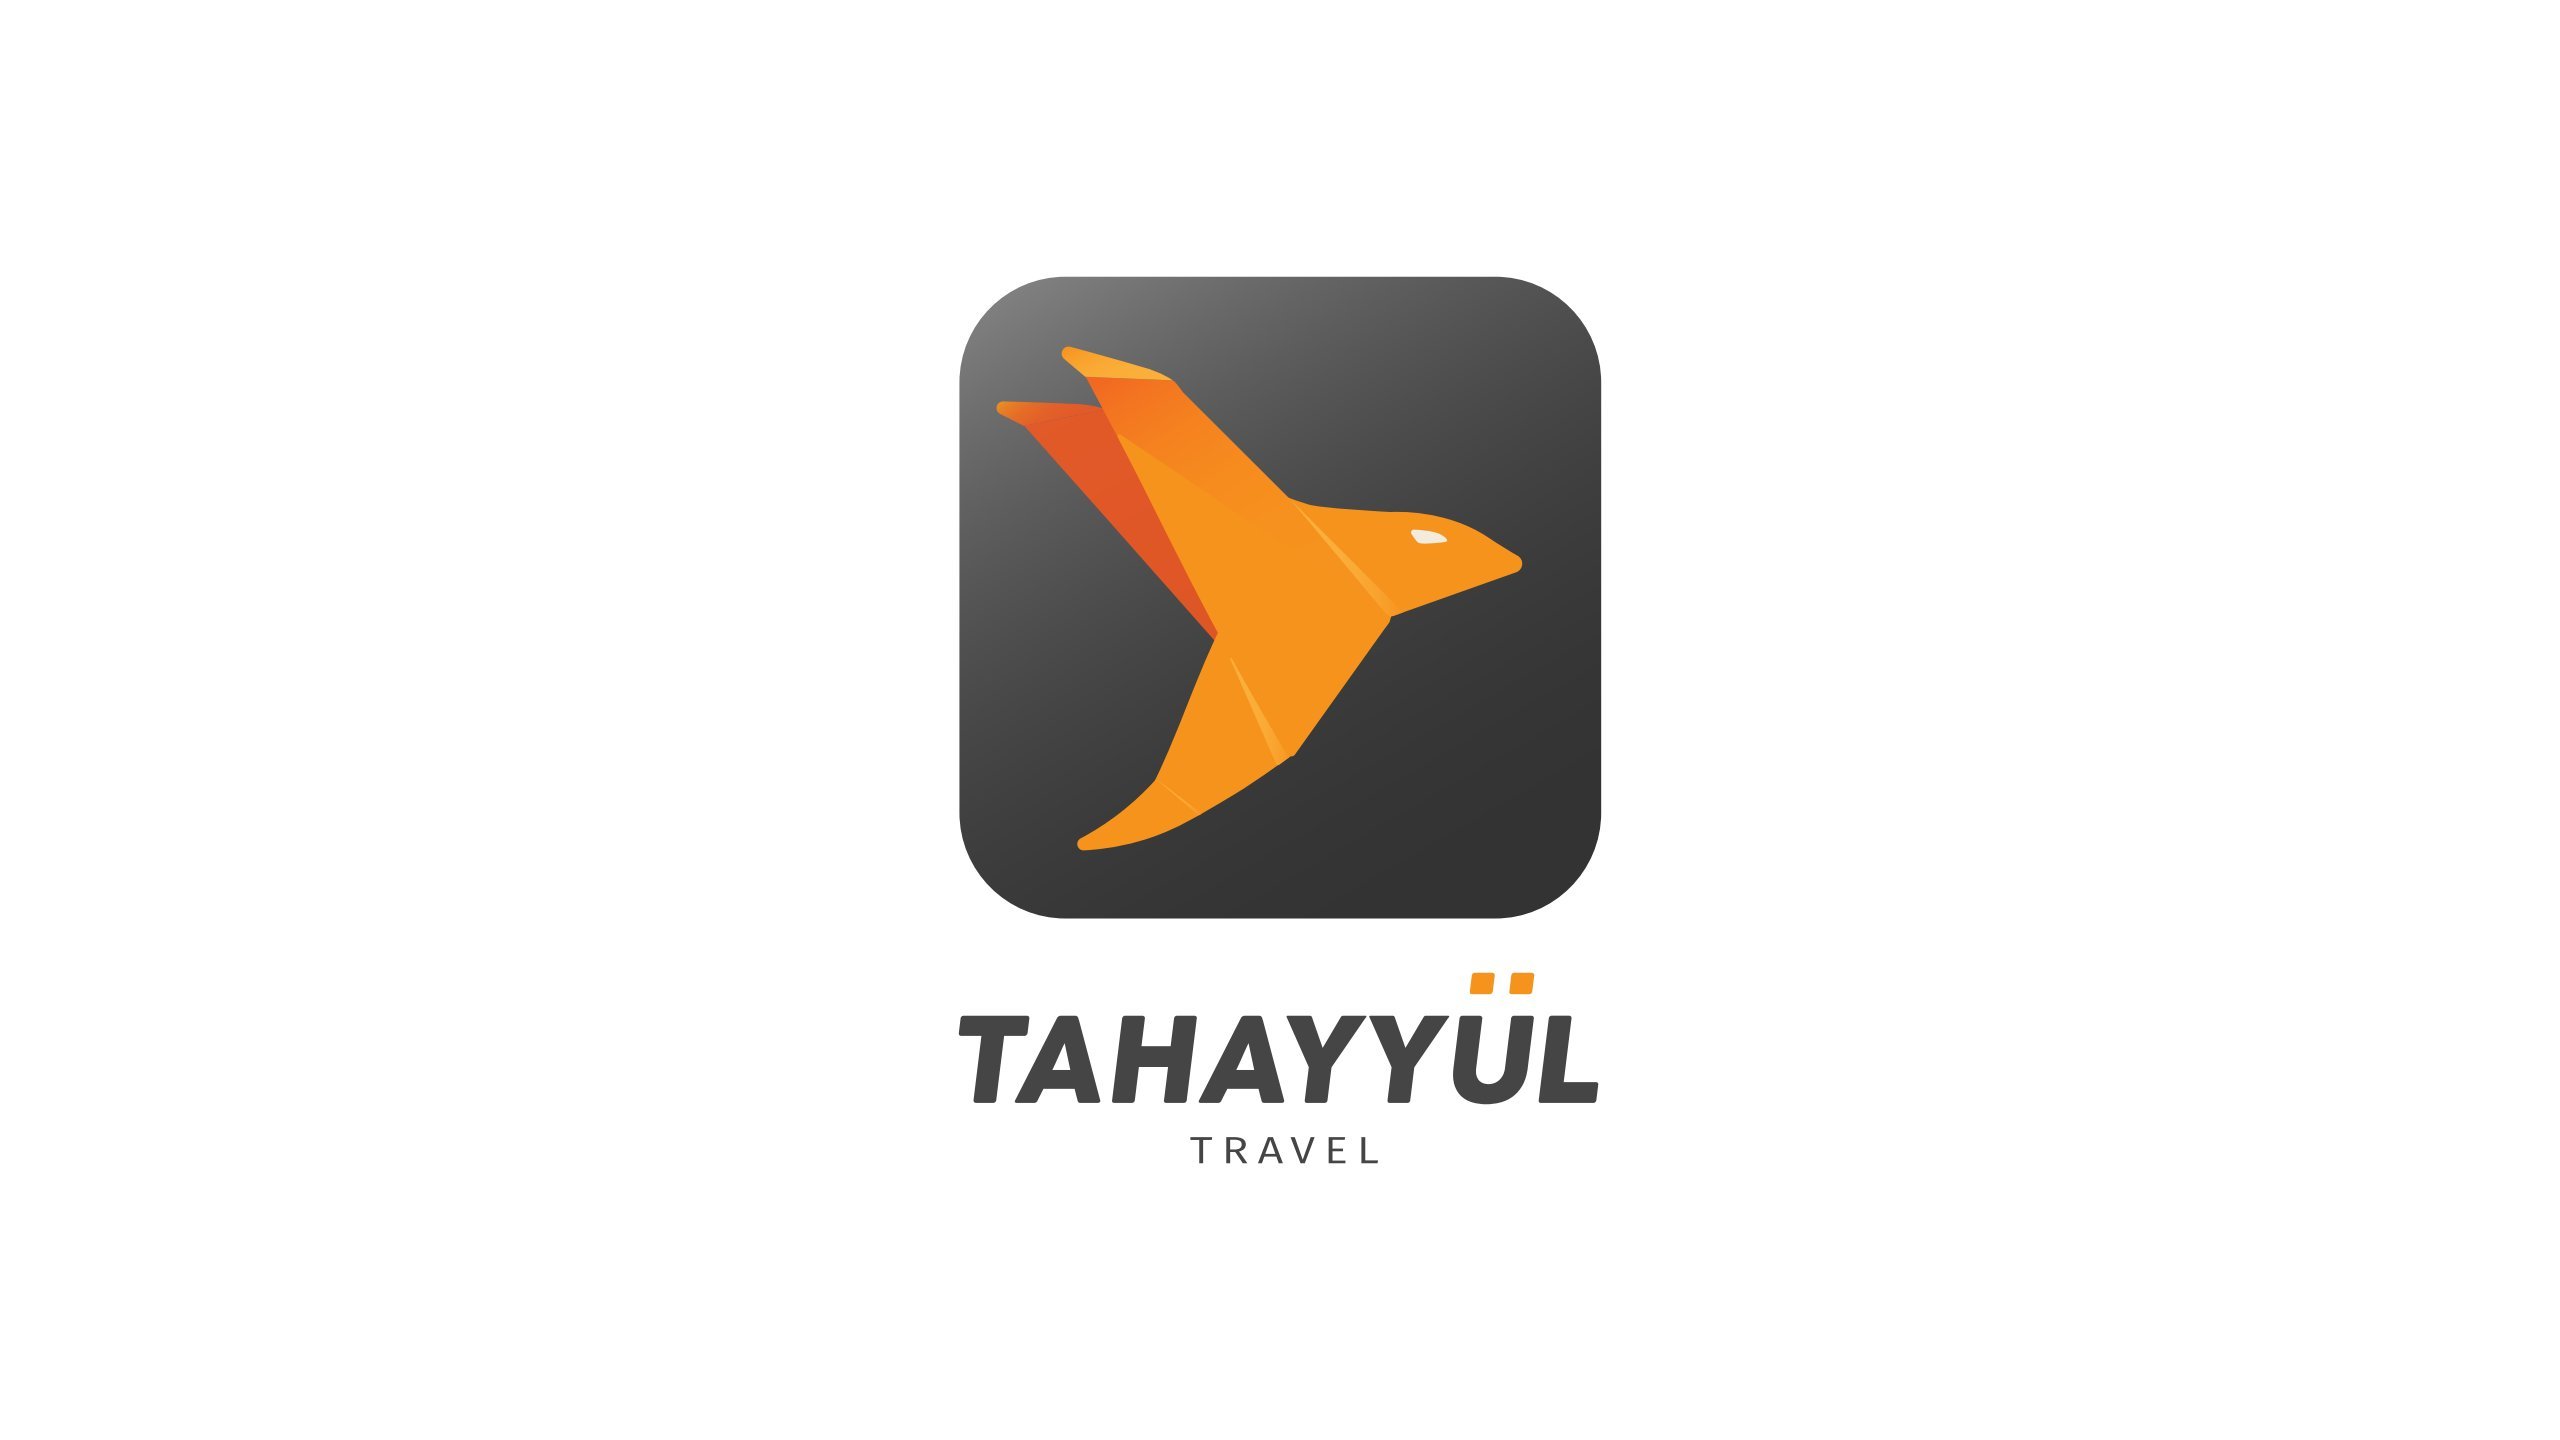 Founded in Istanbul, Tahayyul began operation in  2017 with its prime Vision to provide travelers a pleasant & value for money Tour experience in Turkey.